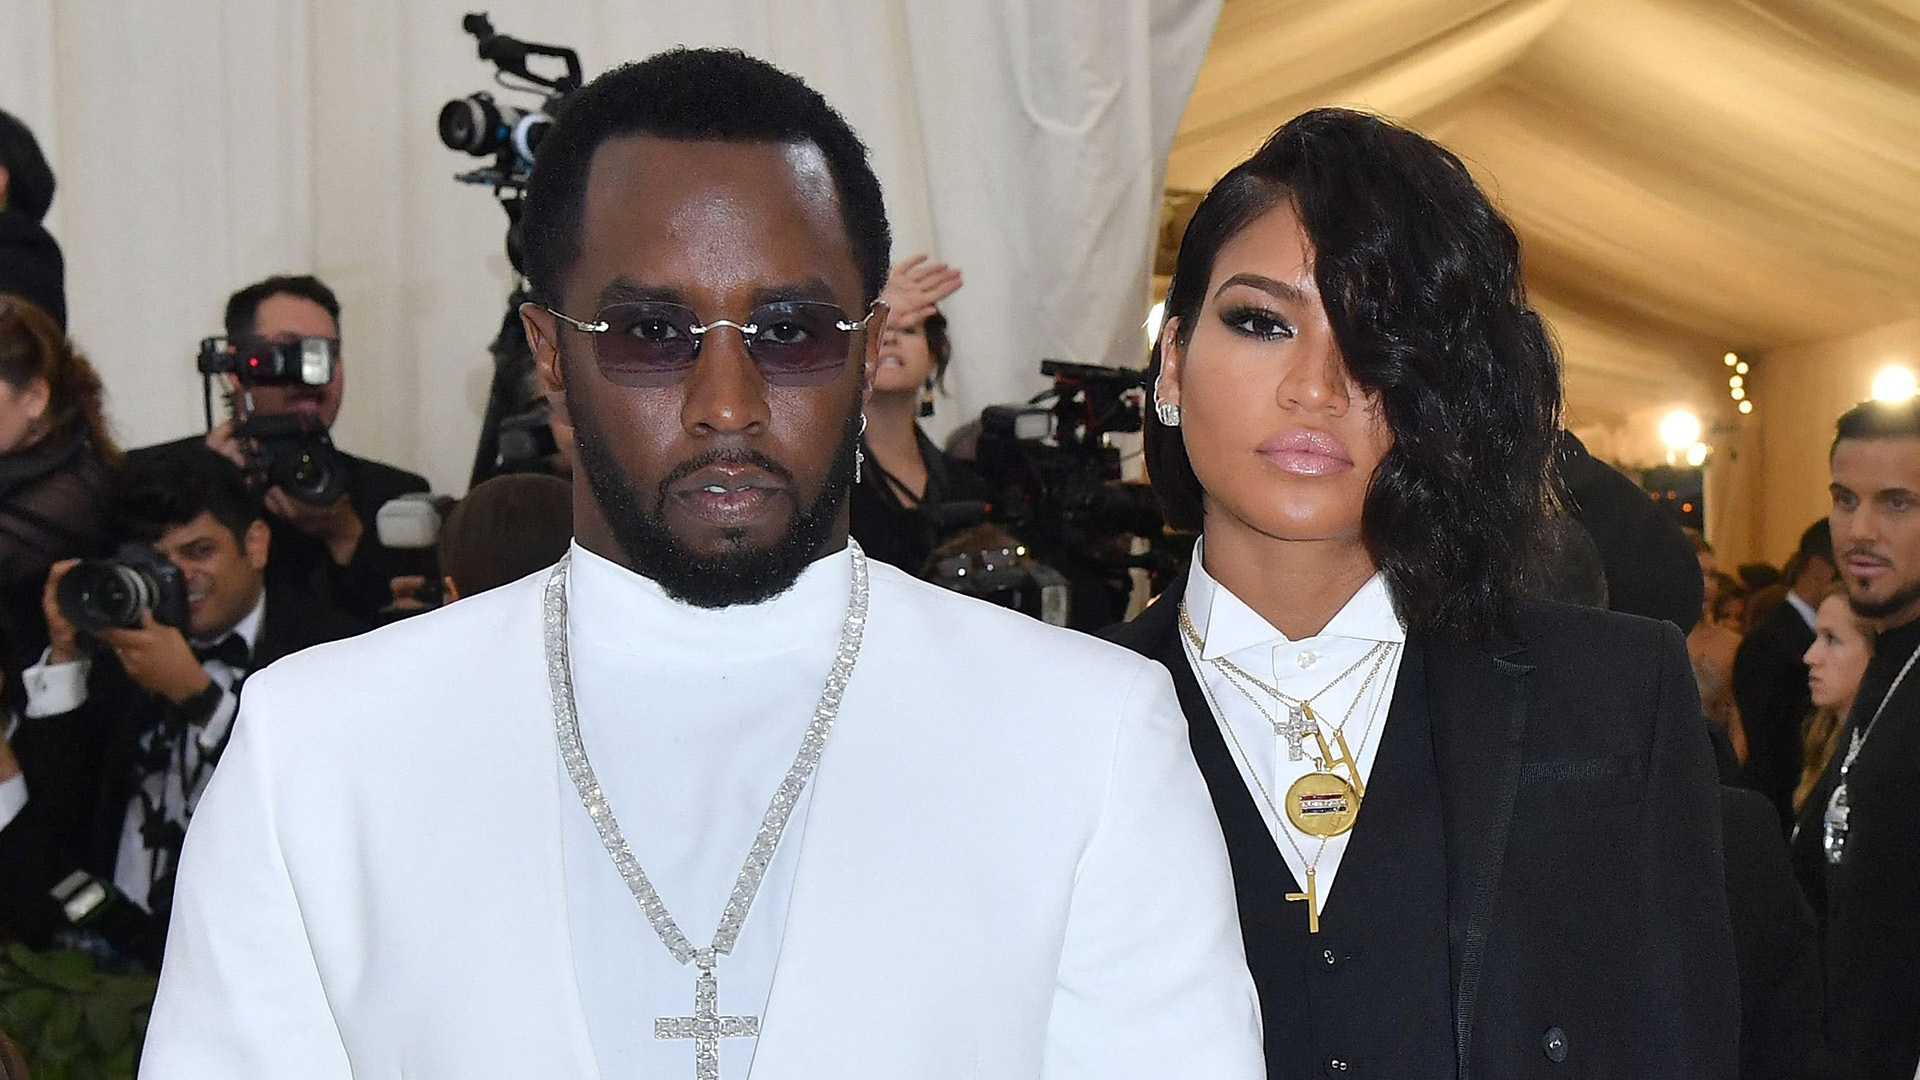 Sean Combs’ partner Cassie accuses him of rape, years of abuse